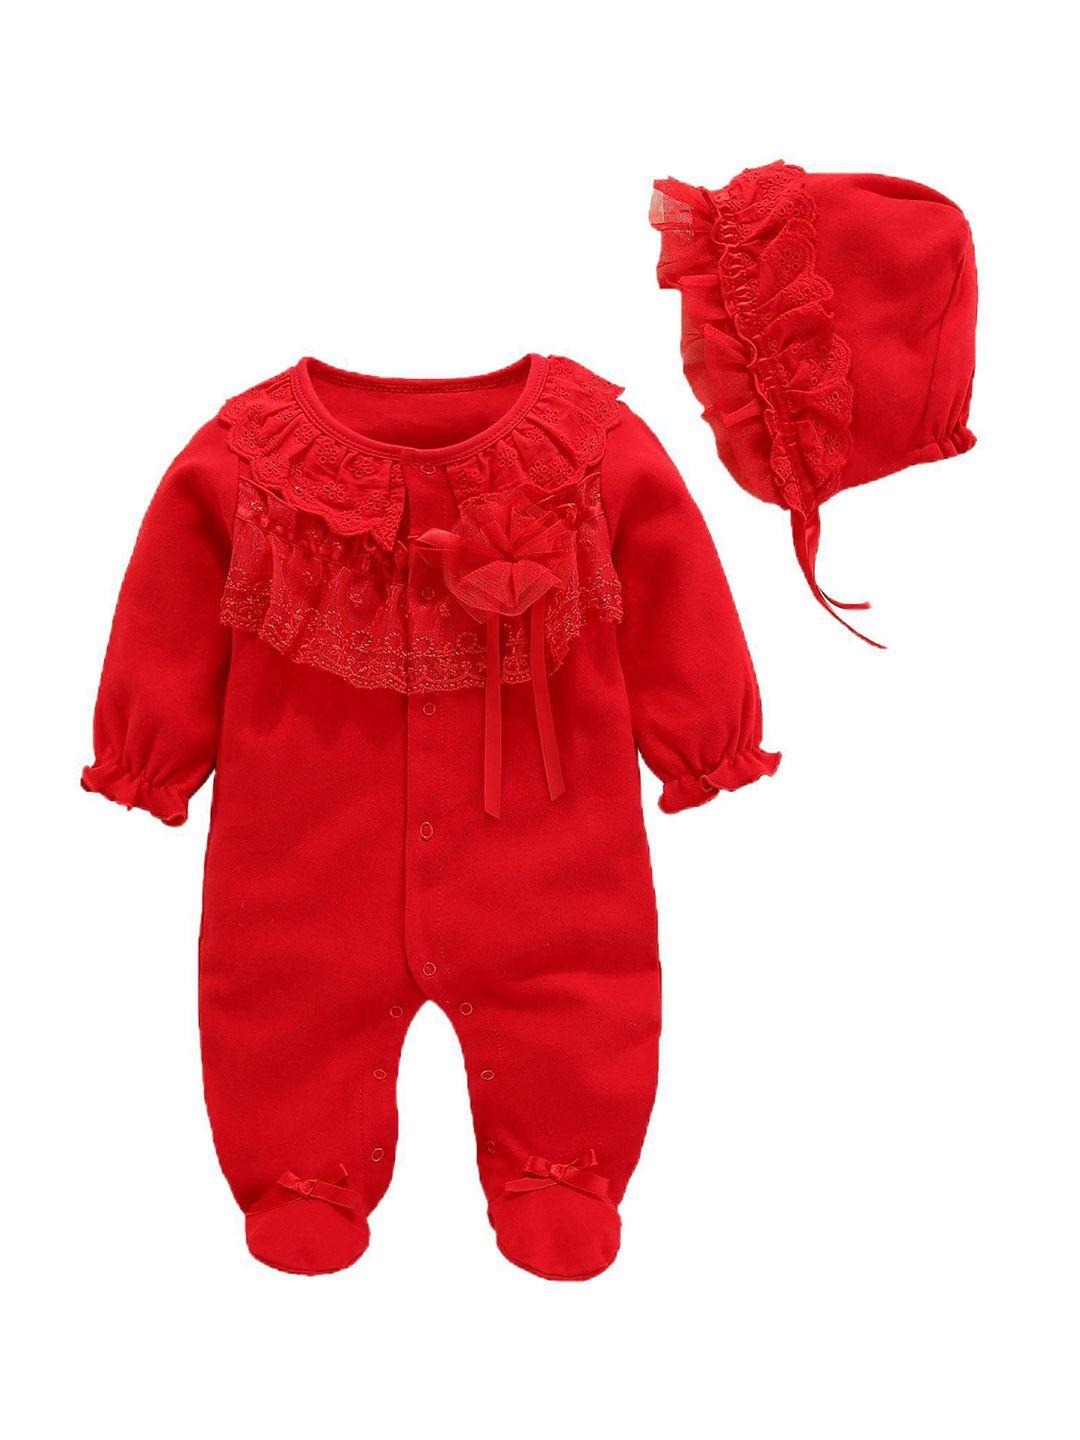 stylecast-infant-girls-self-design-cotton-rompers